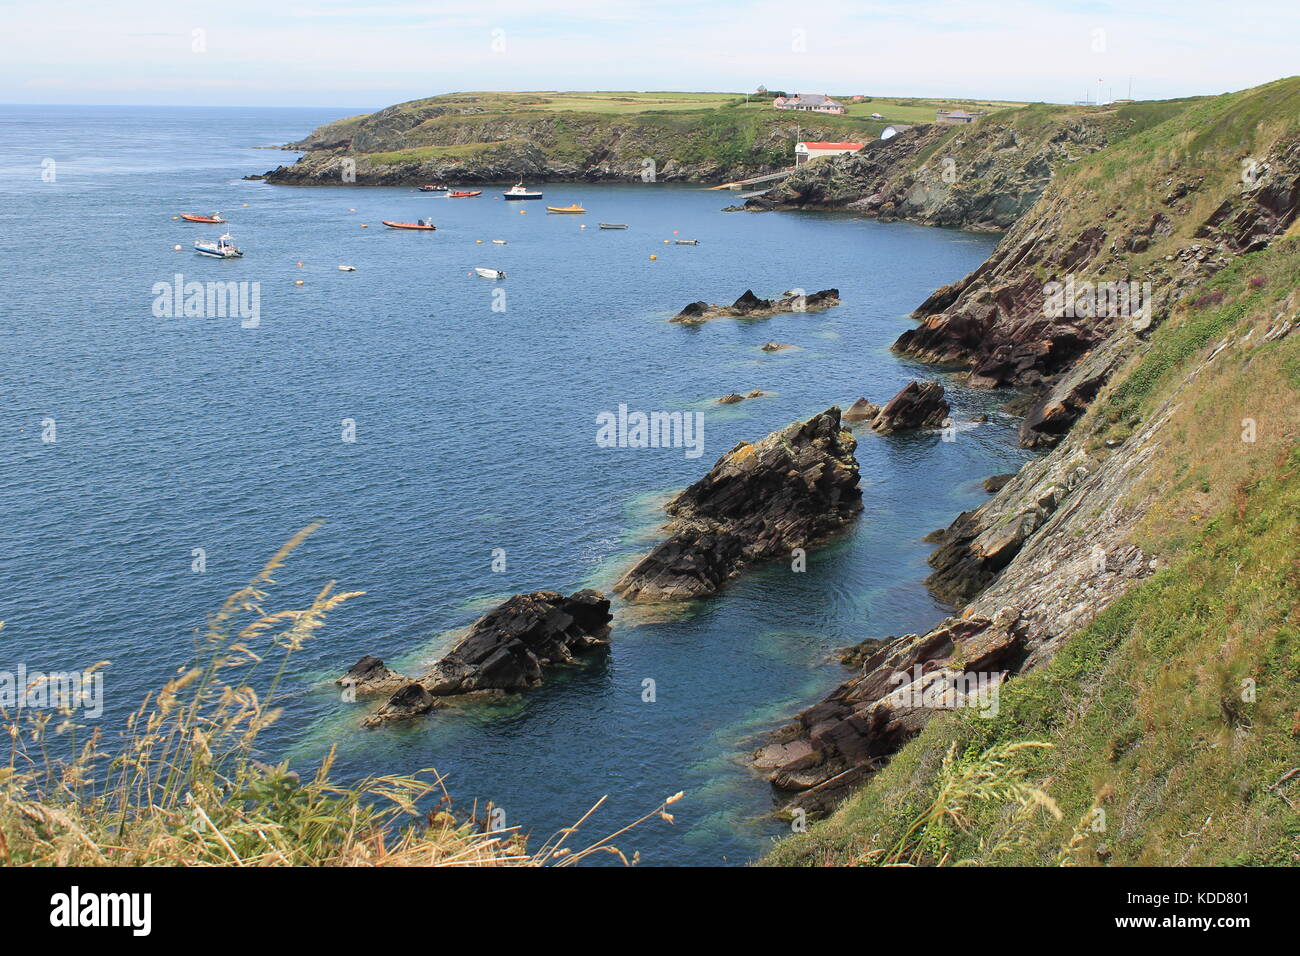 Towards Ynys Dinas Lifeboat Station overlooking Porthstinian and Ogof Mary, St Justinian's, near St David's, Pembrokeshire, Wales, UK Stock Photo